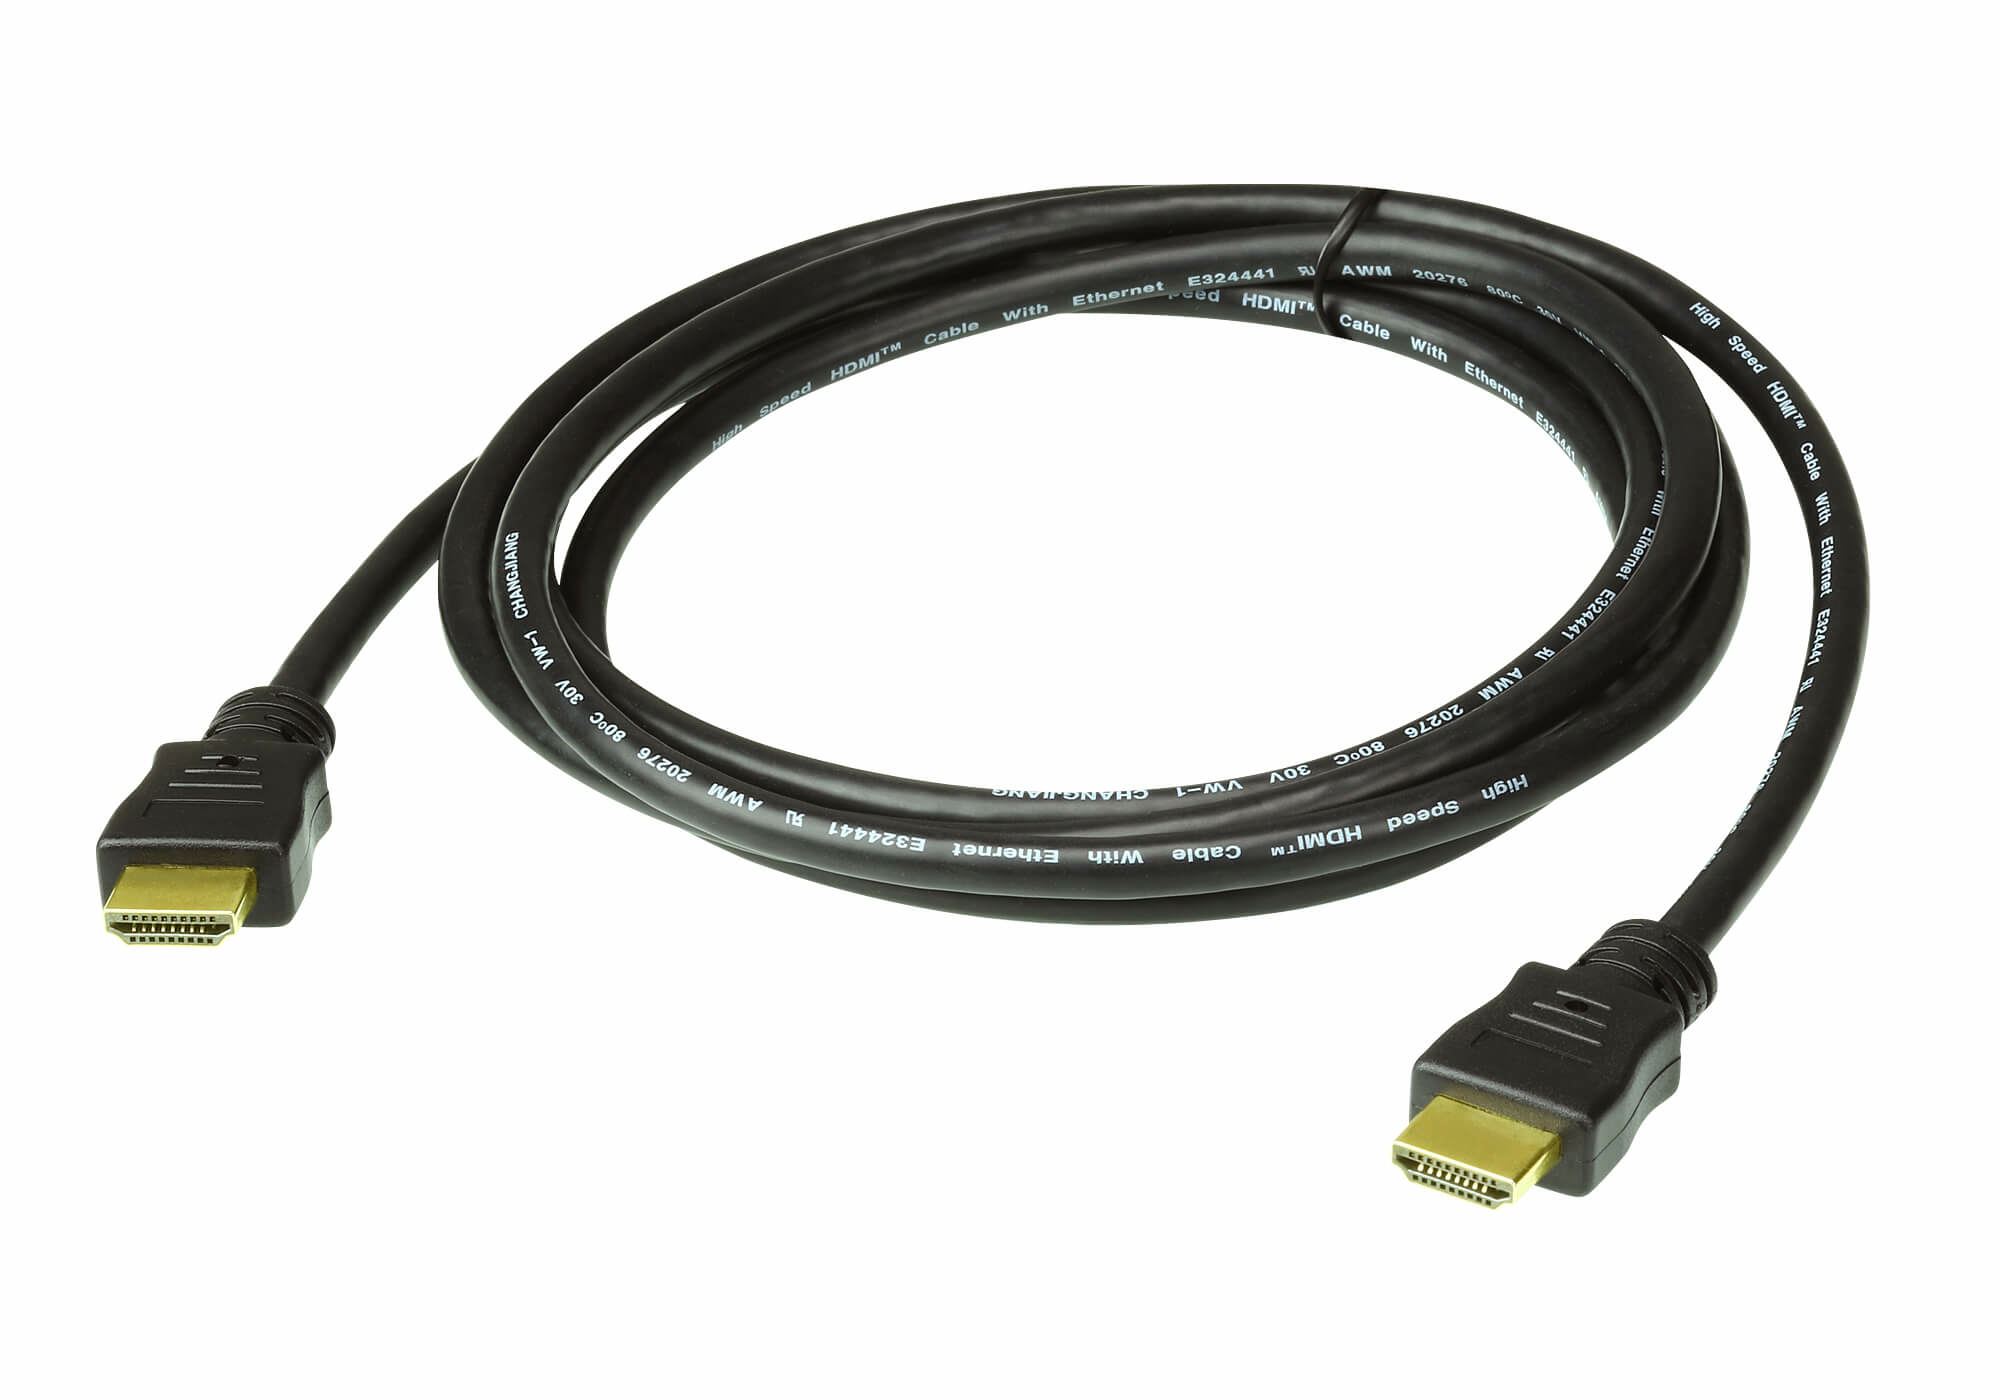 Photos - Cable (video, audio, USB) ATEN High Speed HDMI Cable with Ethernet True 4K ; 2L-7 ( 4096X2160 @ 60Hz)